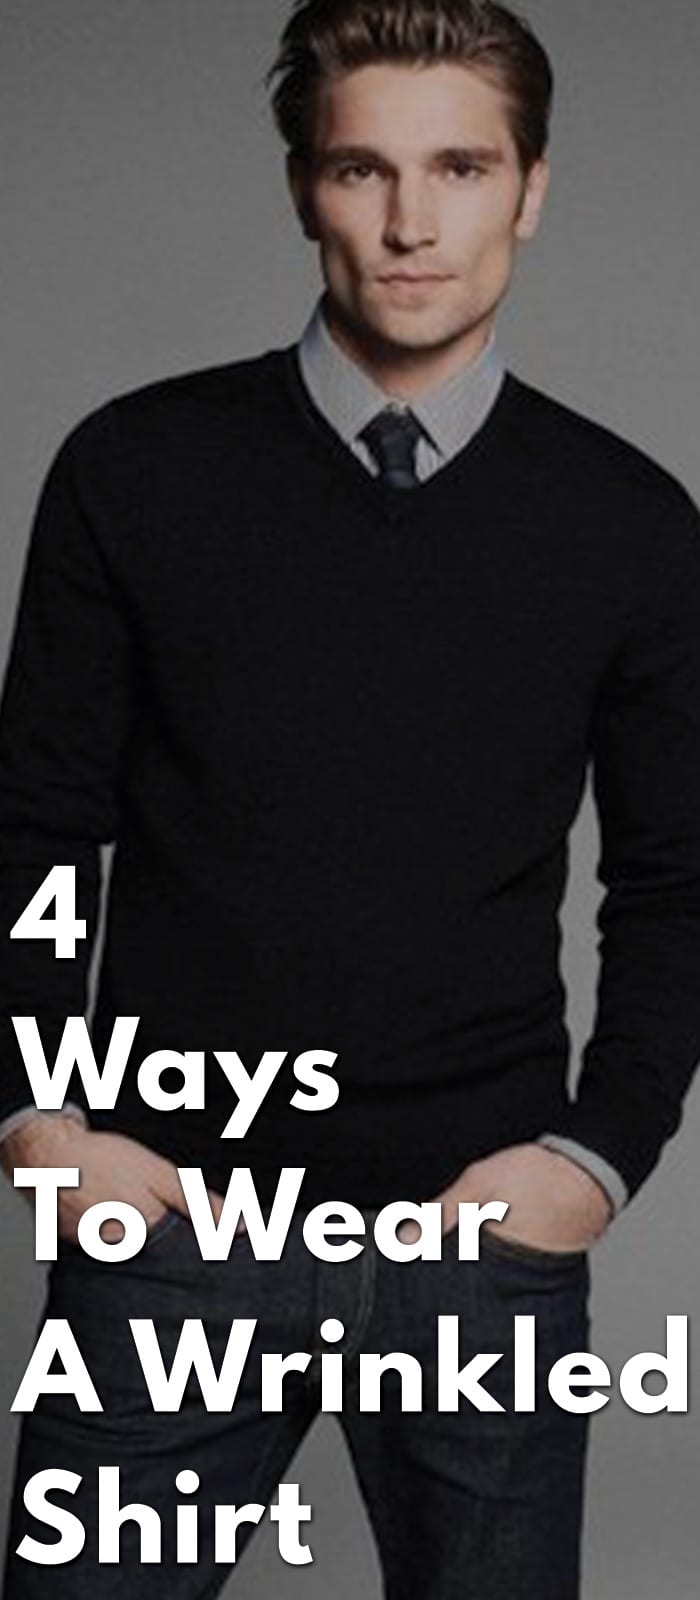 4-Ways-To-Wear-A-Wrinkled-Shirt